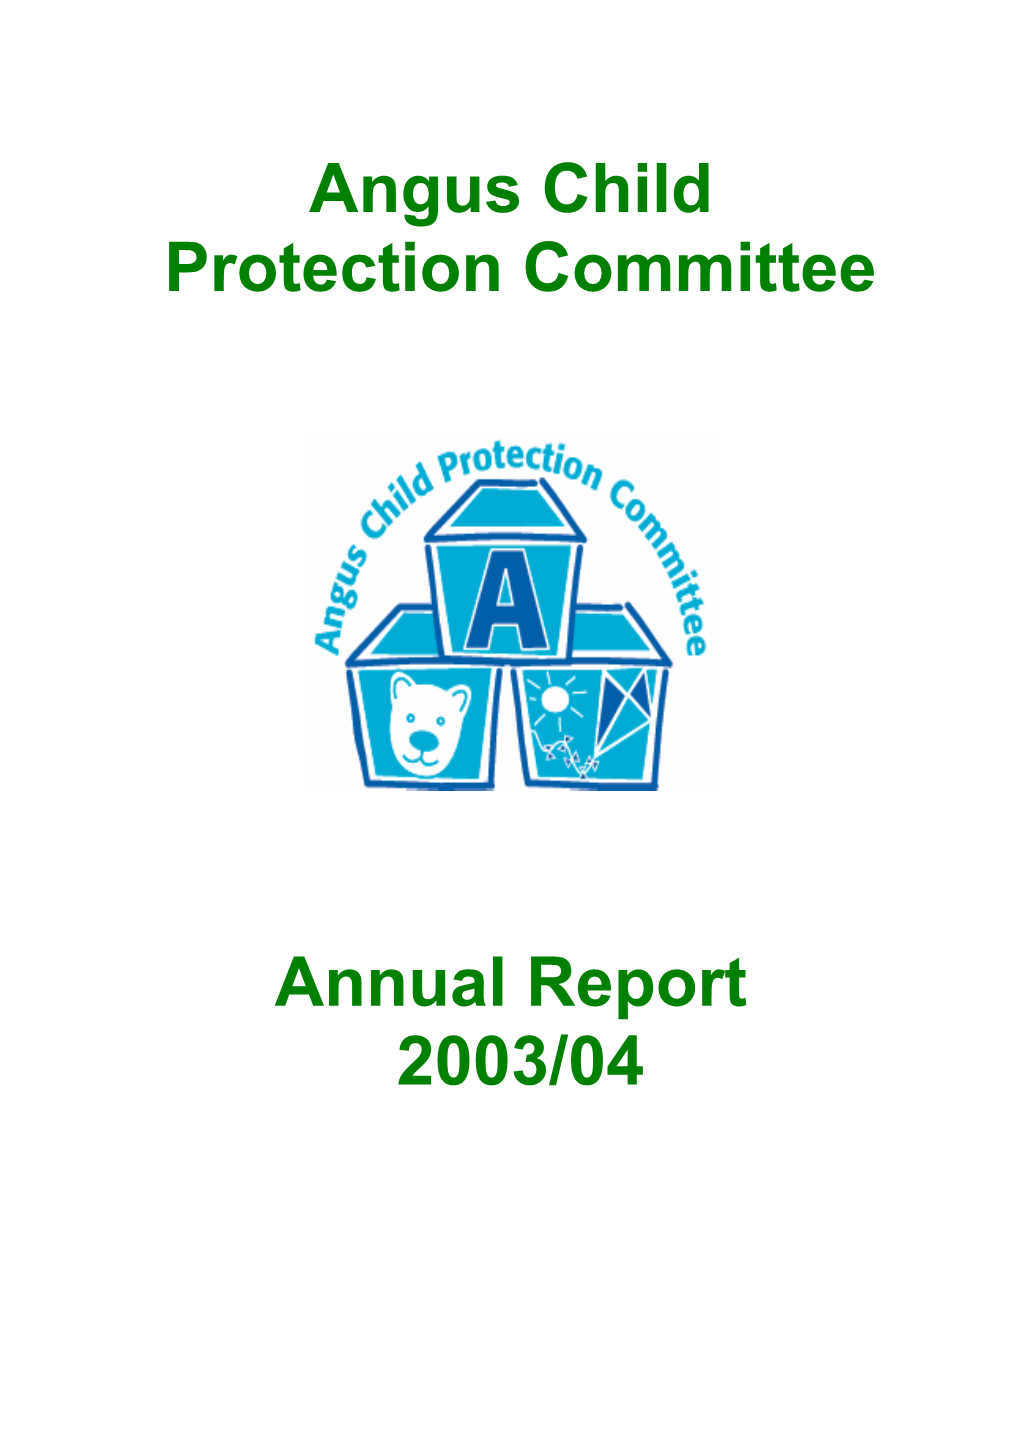 Angus Child Protection Committee Annual Report 2003/04